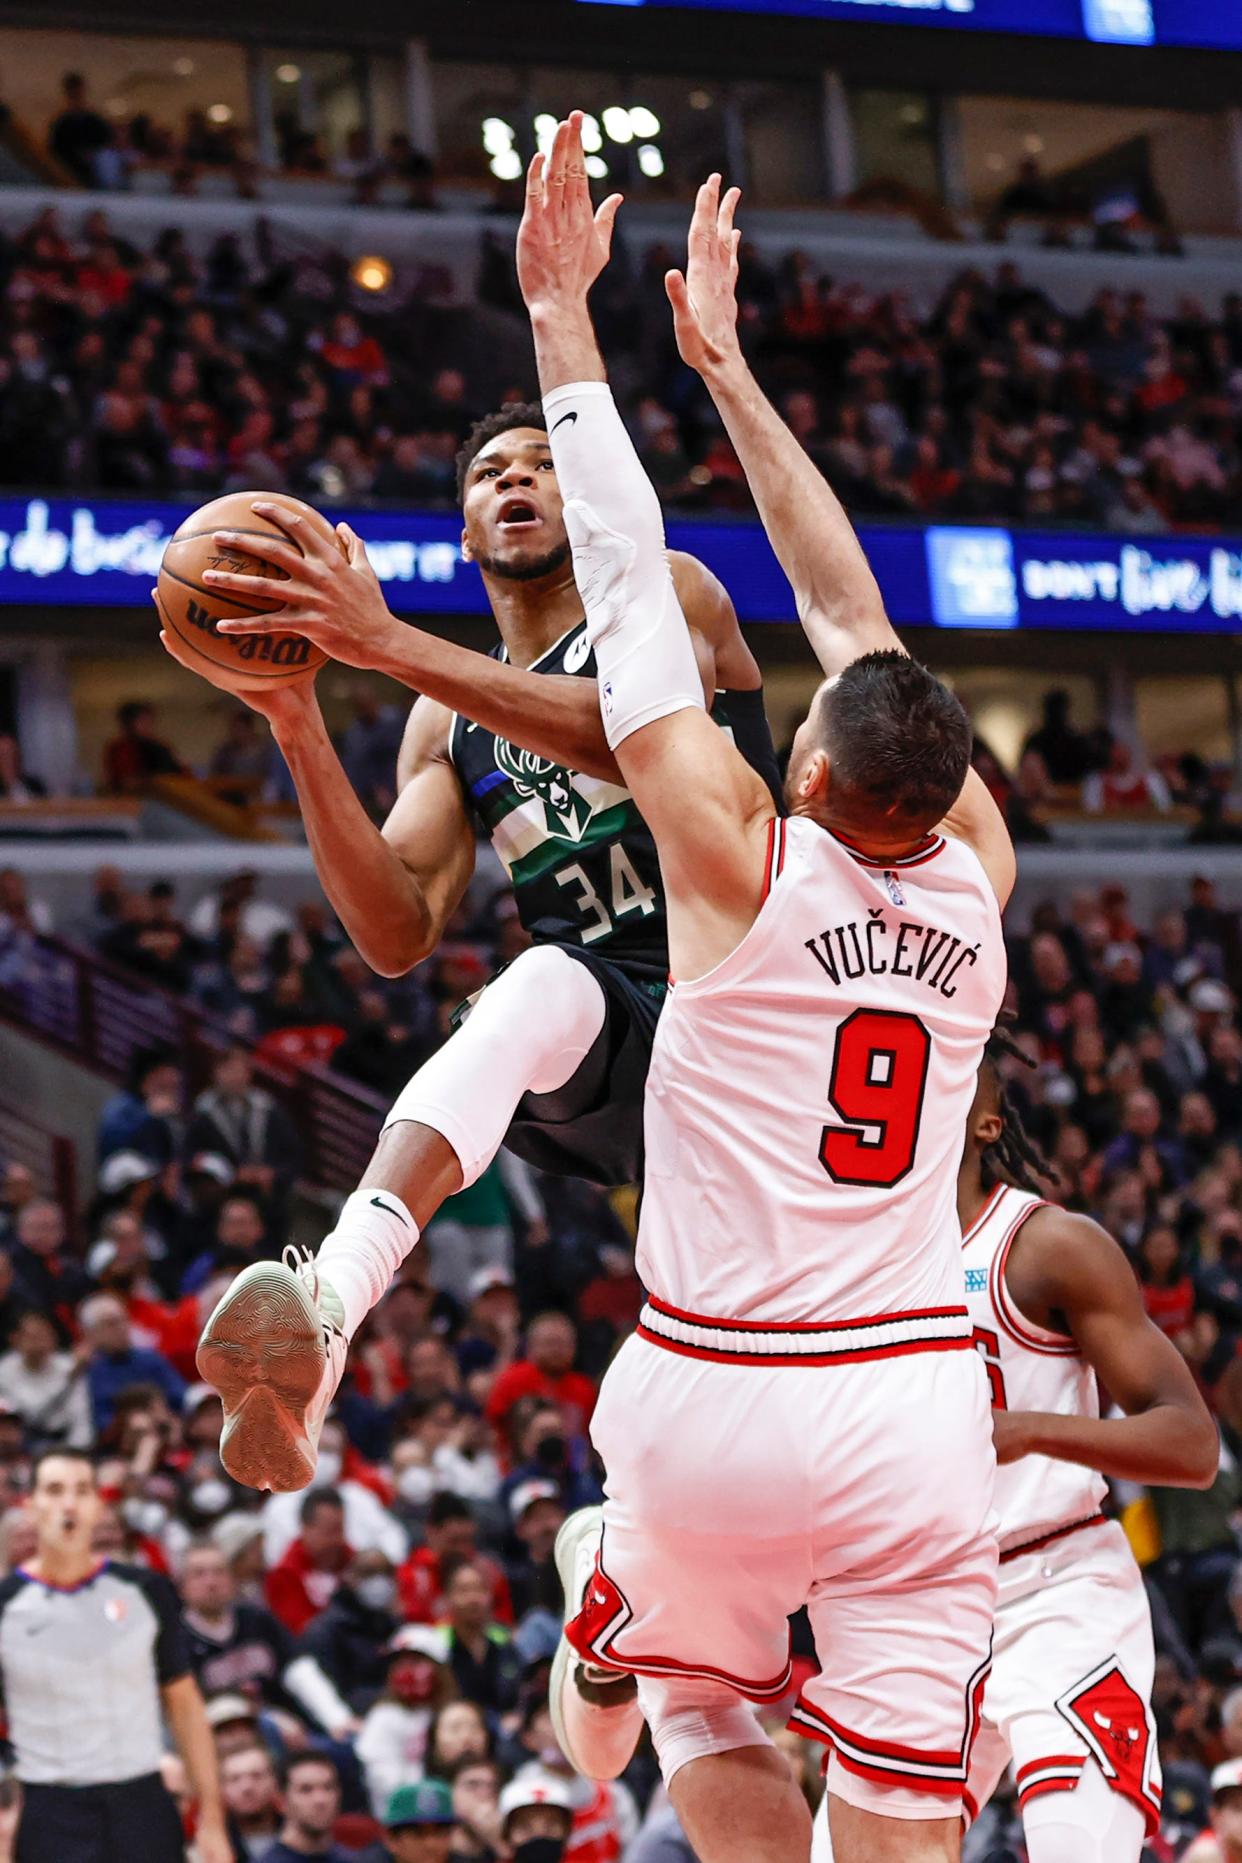 The Chicago Bulls and Milwaukee Bucks face off in the first round of the 2022 NBA Playoffs.